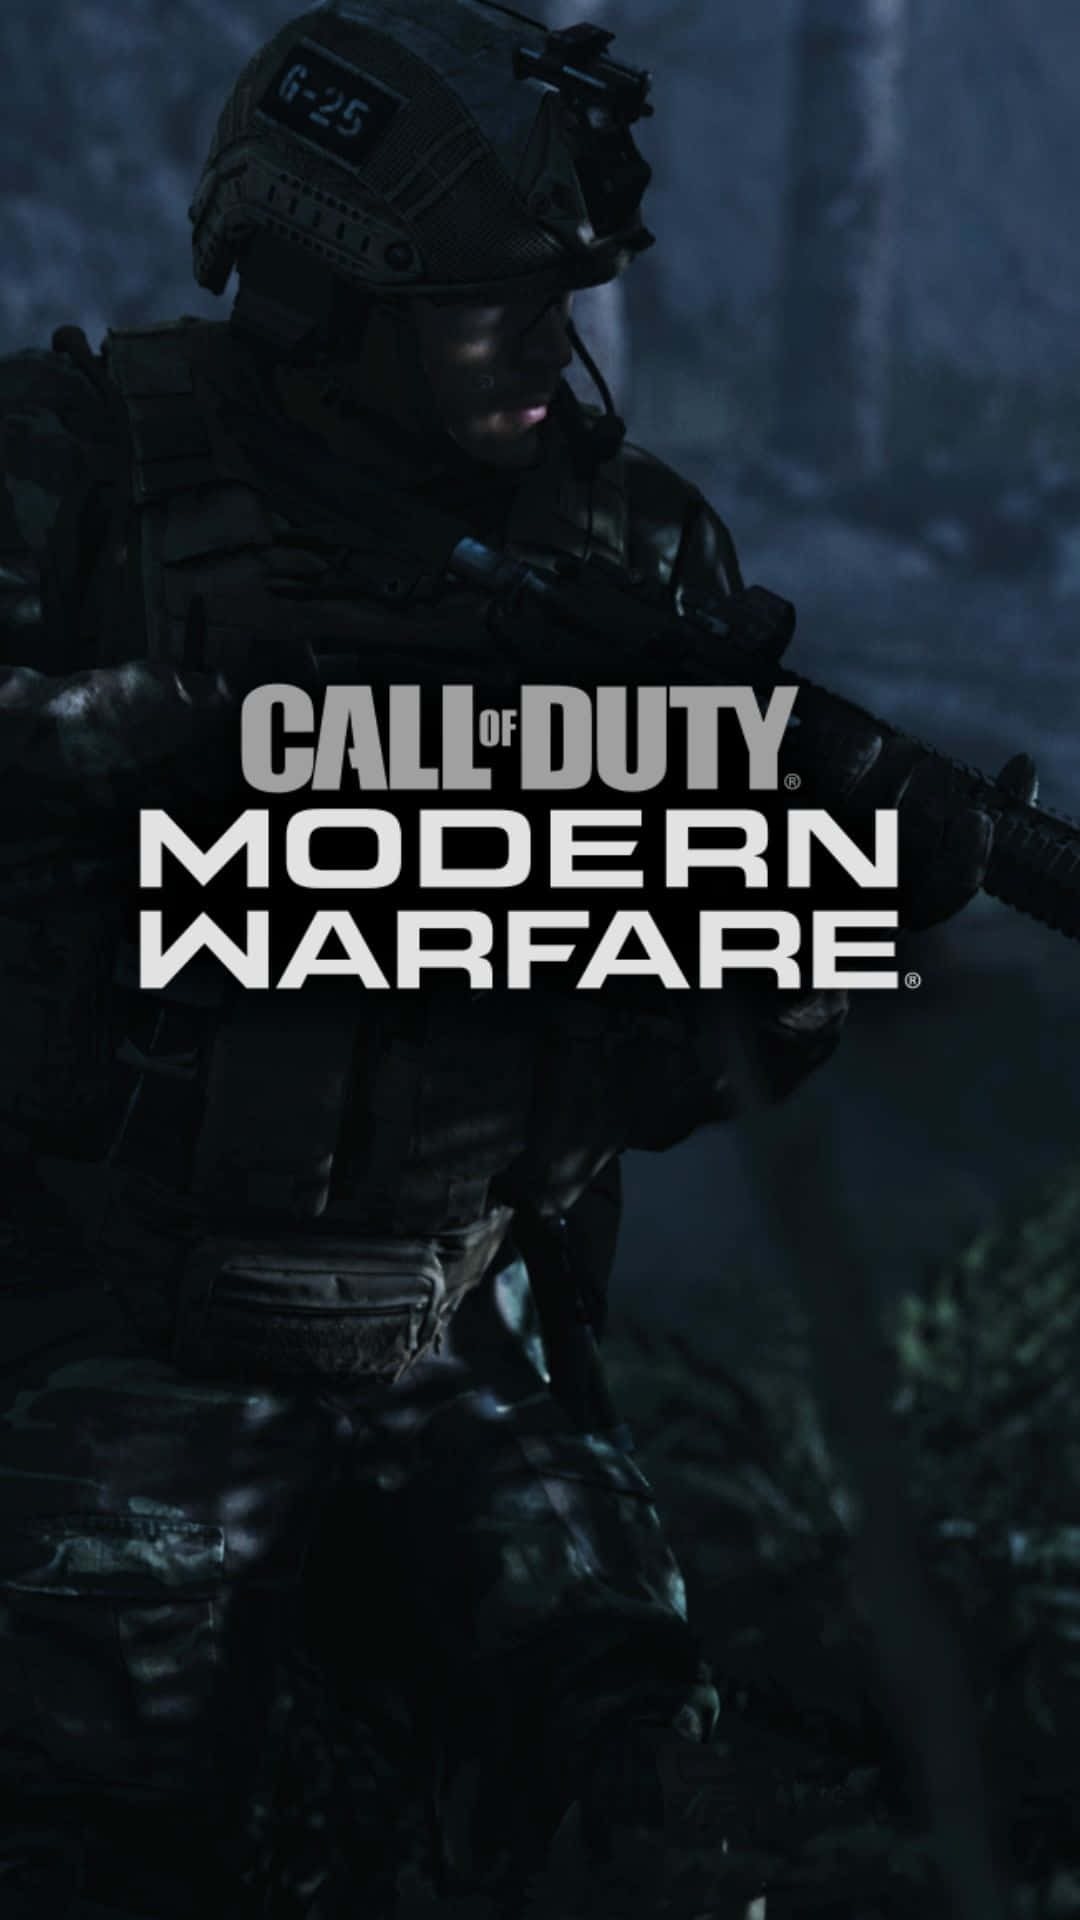 Battle for Android - Call of Duty Modern Warfare